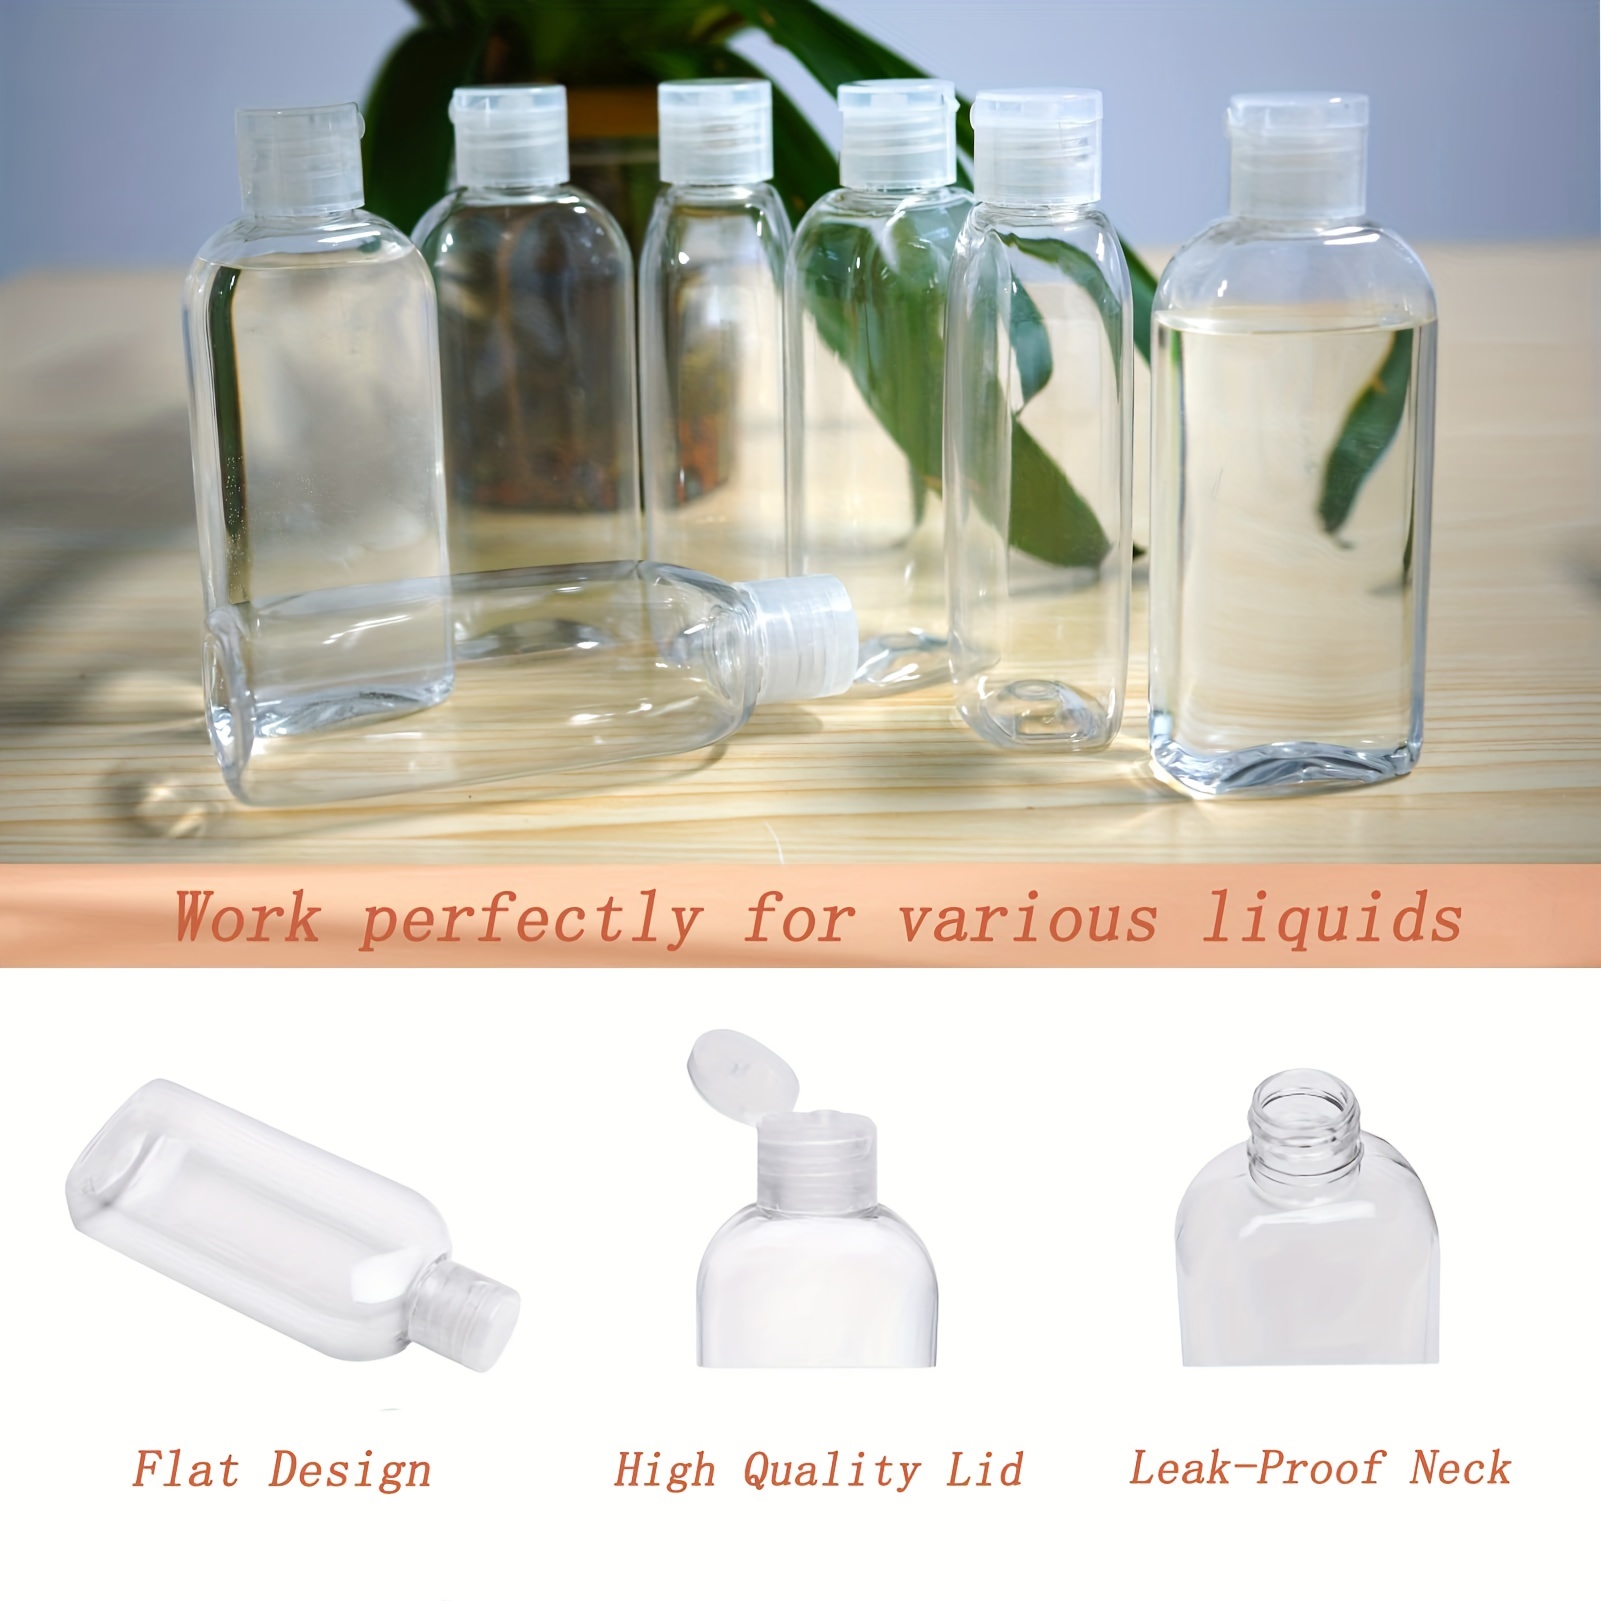 5 packs Refillable Clear Plastic Squeeze Bottles with Flip Cap - TSA  Approved for Liquid Toiletries, Shampoo, Conditioner, and Lotion - BPA Free  - Perfect for Business Trips and Personal Travel